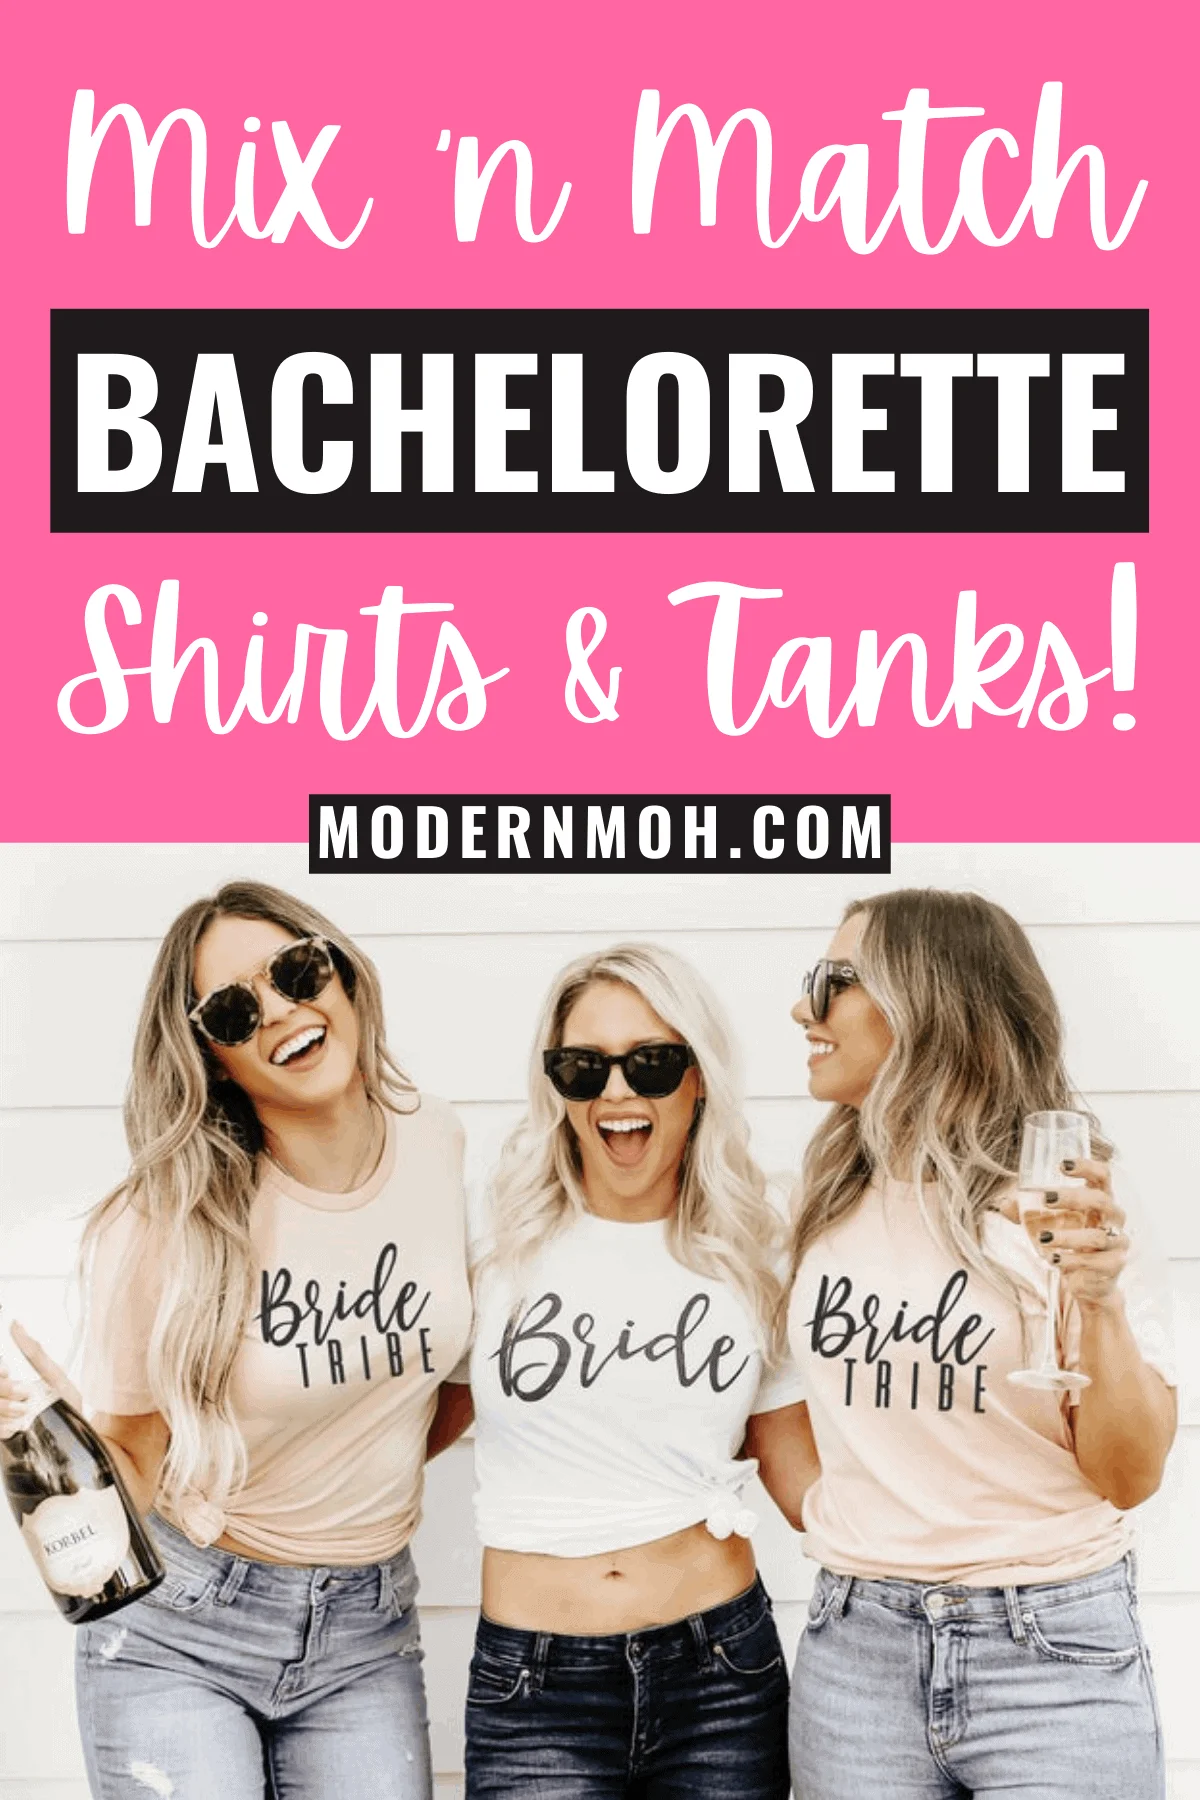 60 Bachelorette Party Shirts and Tanks for Every Squad